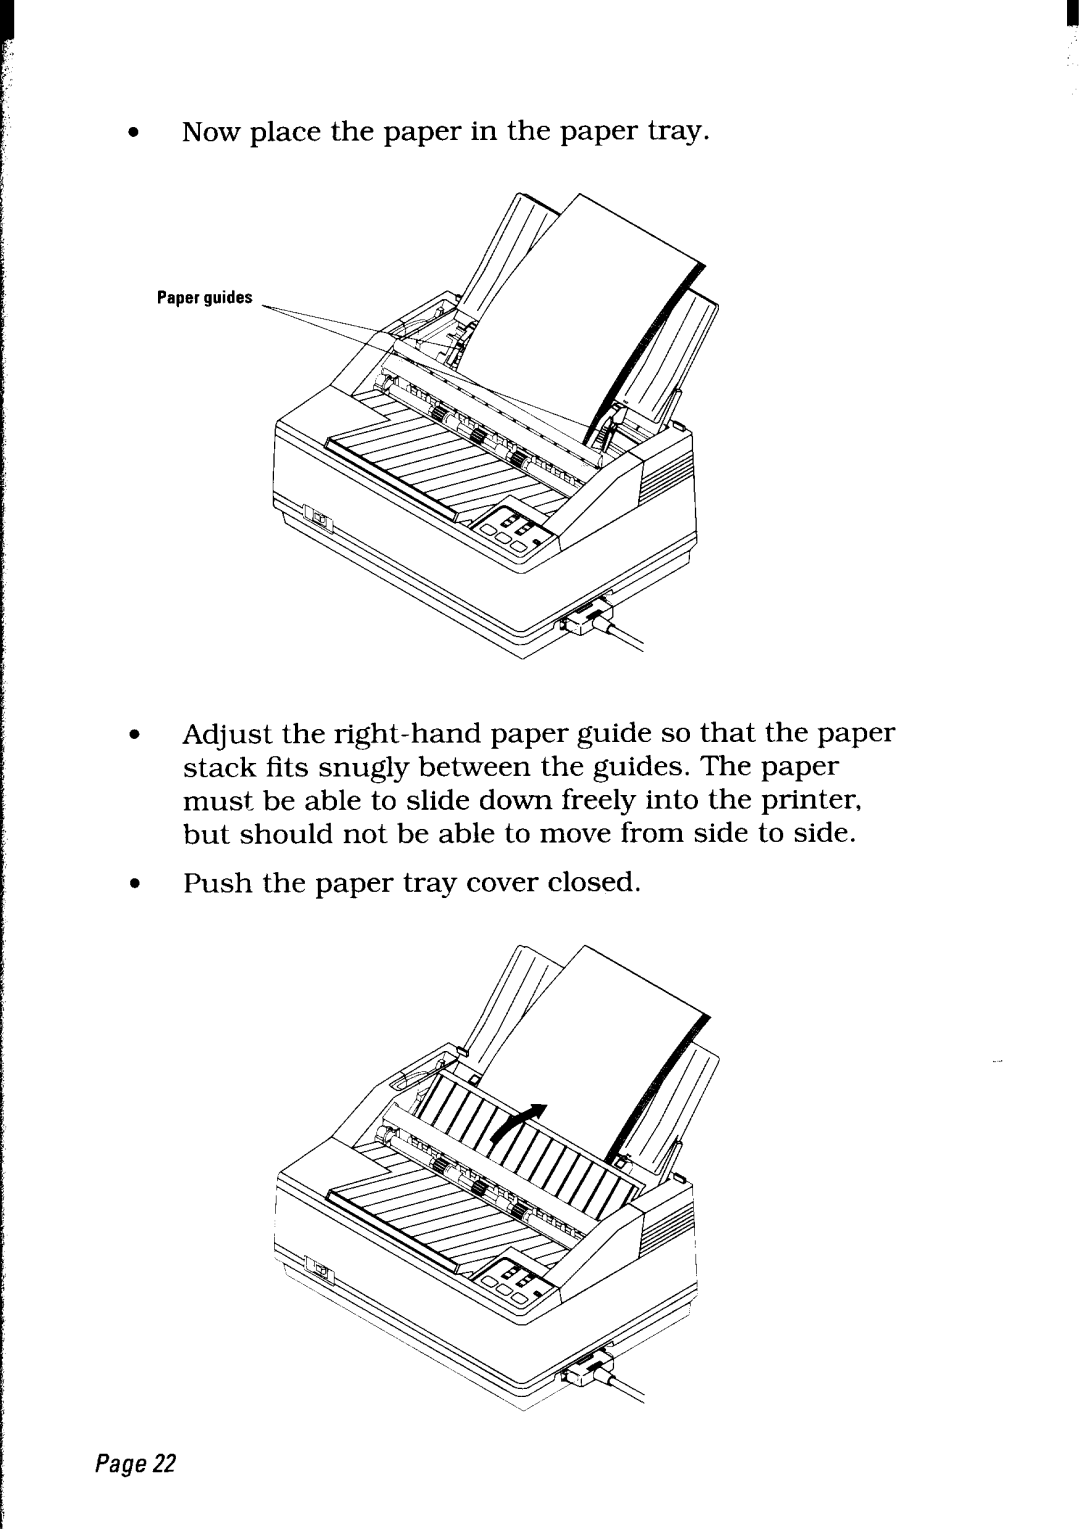 Star Micronics LC24-30 Now place the paper in the paper tray, Push the paper tray cover closed, Page, Paper guides 